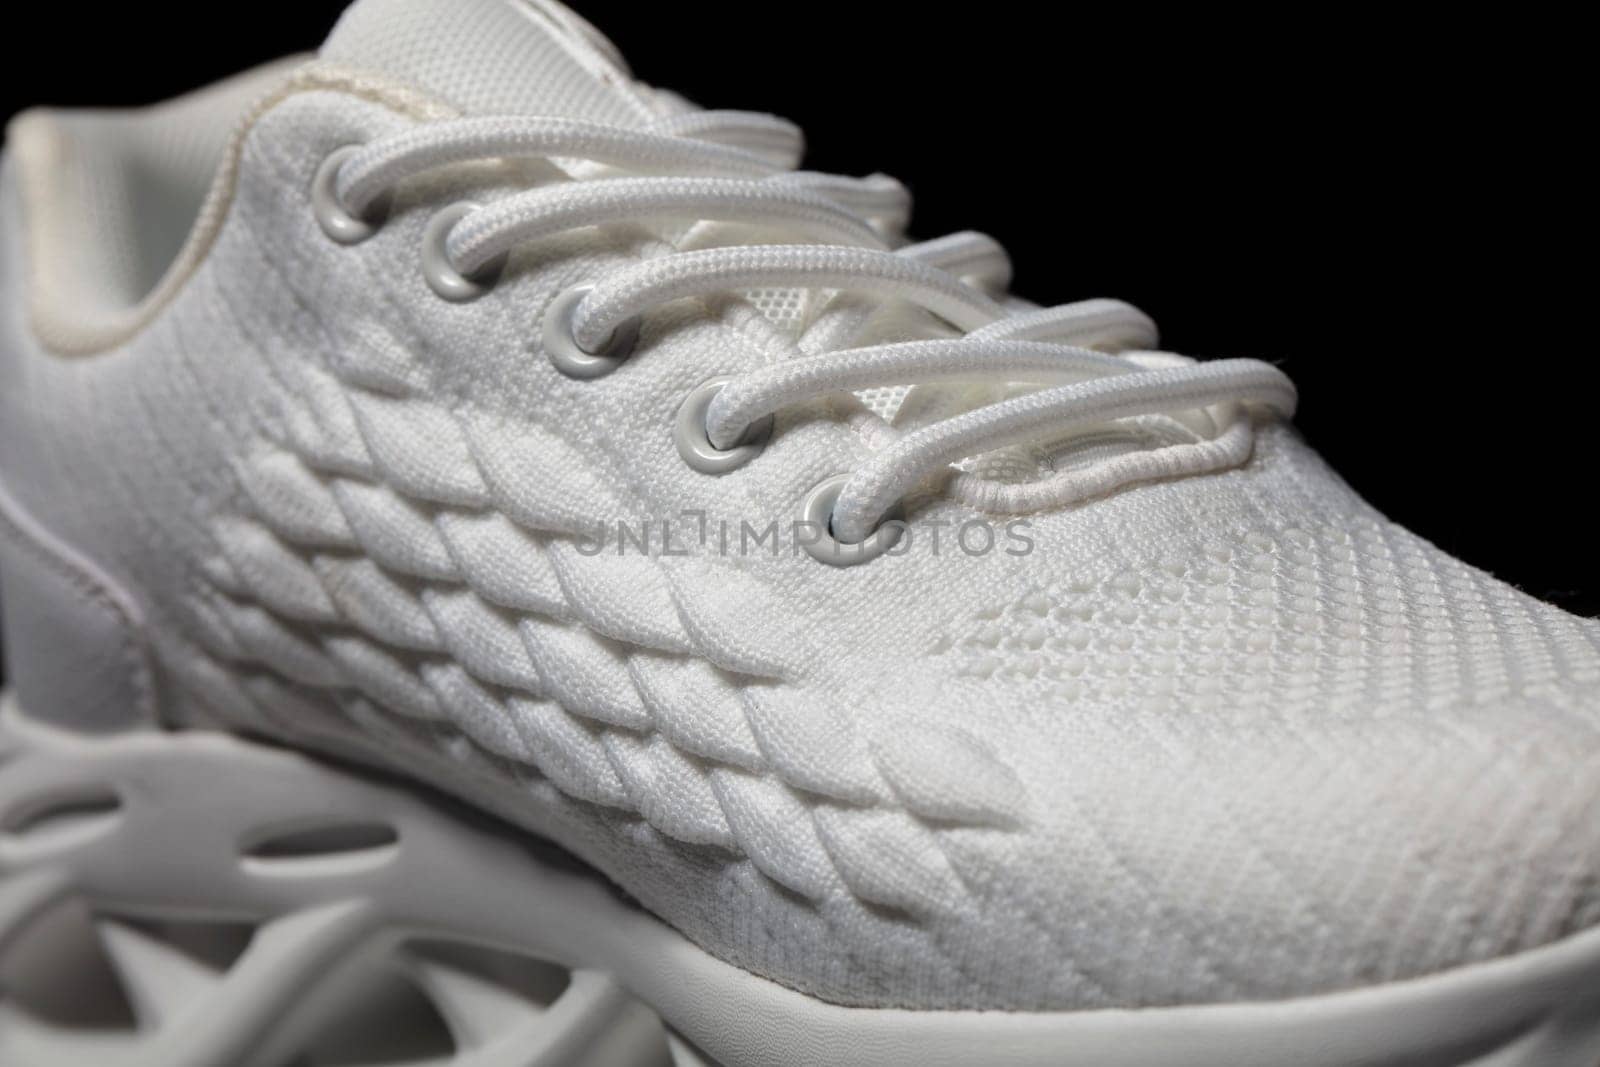 Part of a white fabric sneaker on a dark background.